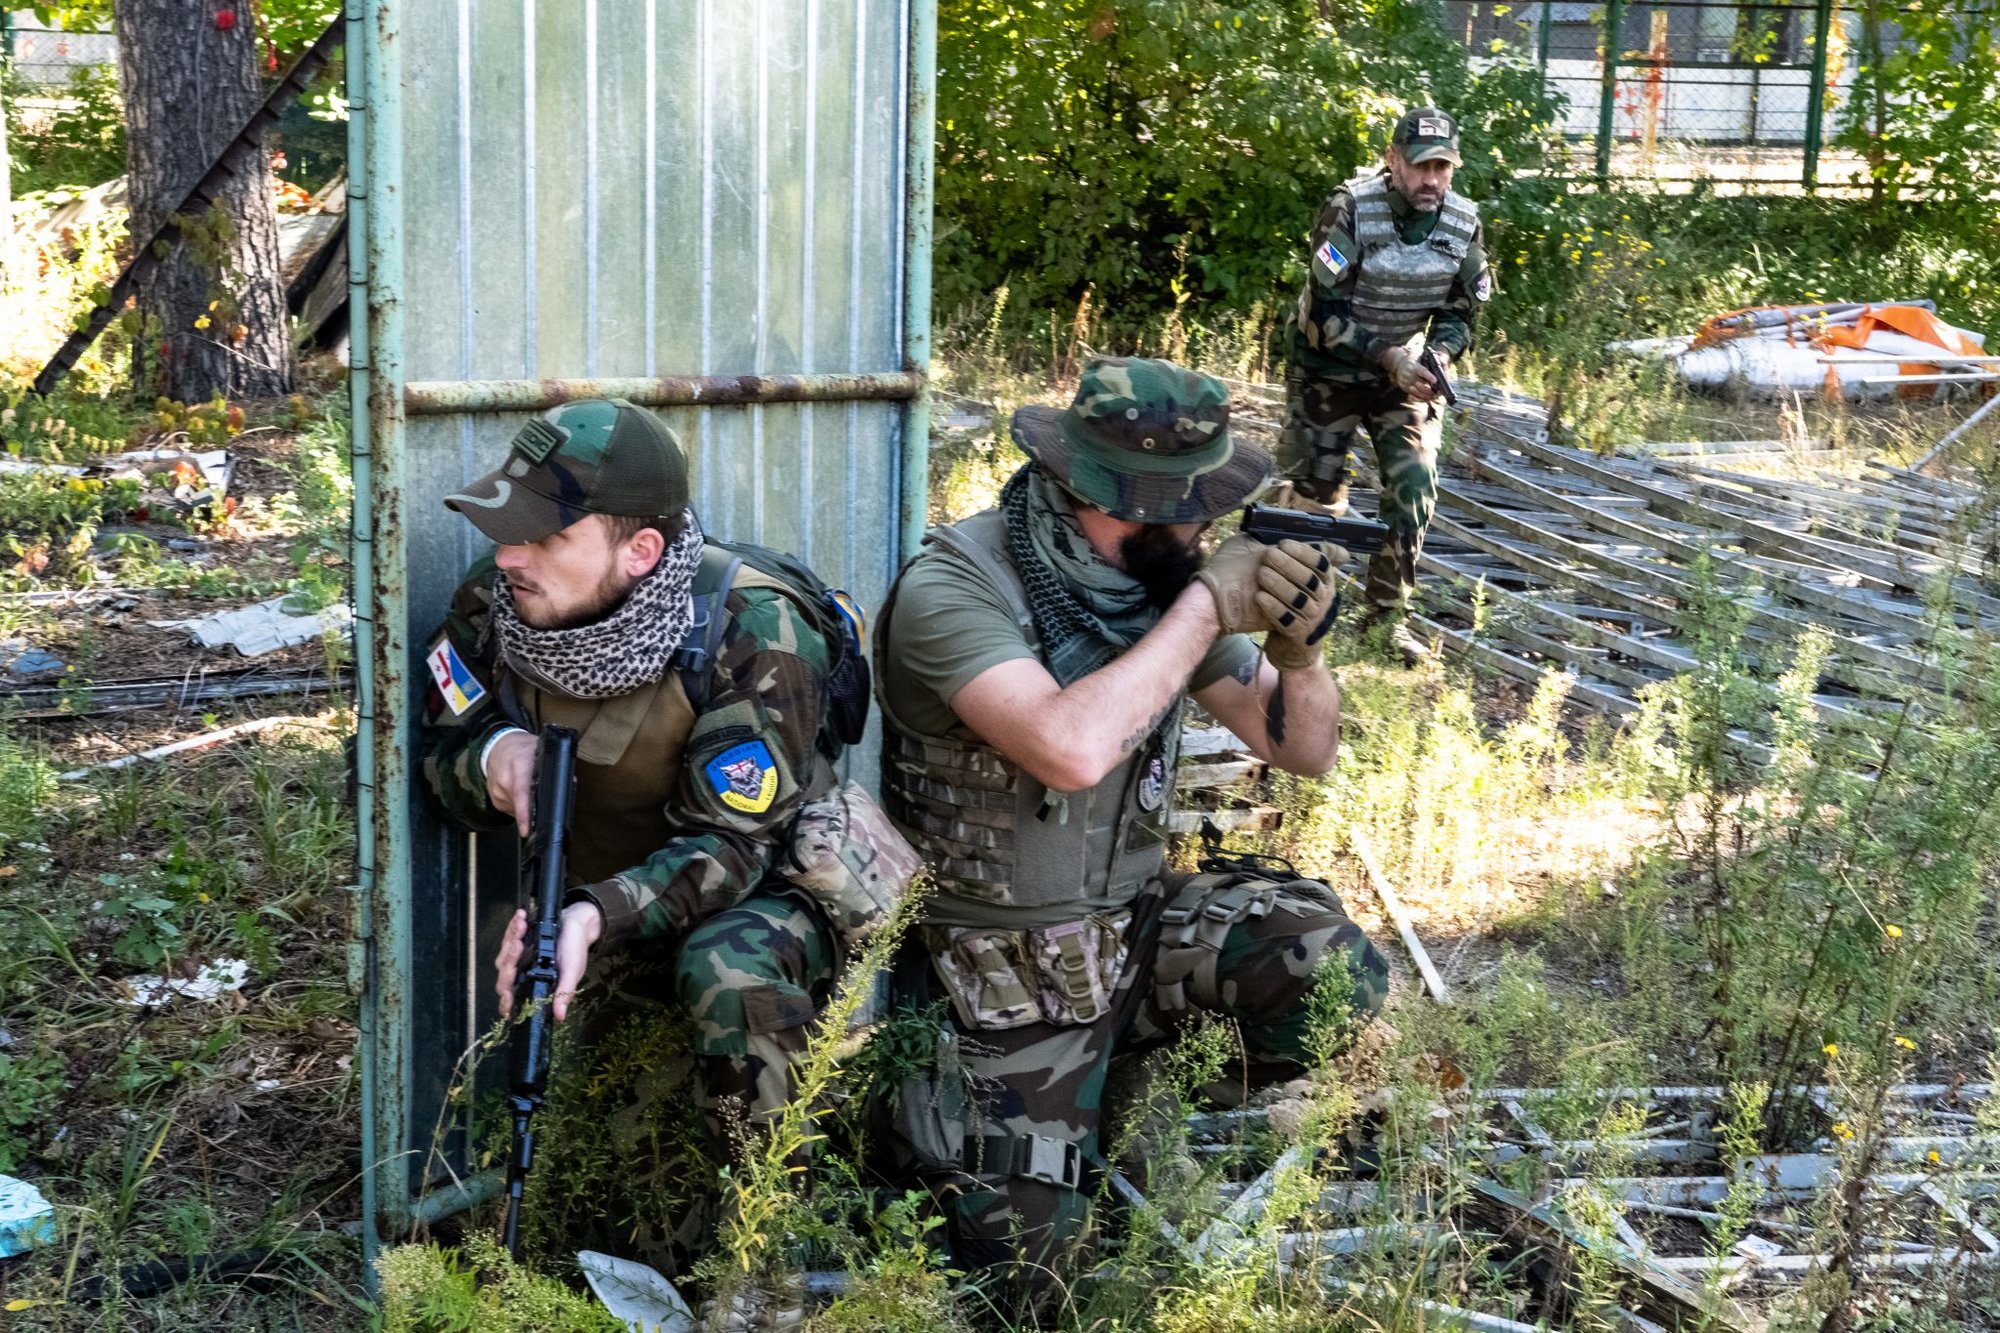 The Georgia National Legion trains at their base on the outskirts of Kyiv in 2021. Photo by Nolan Peterson/Coffee or Die.